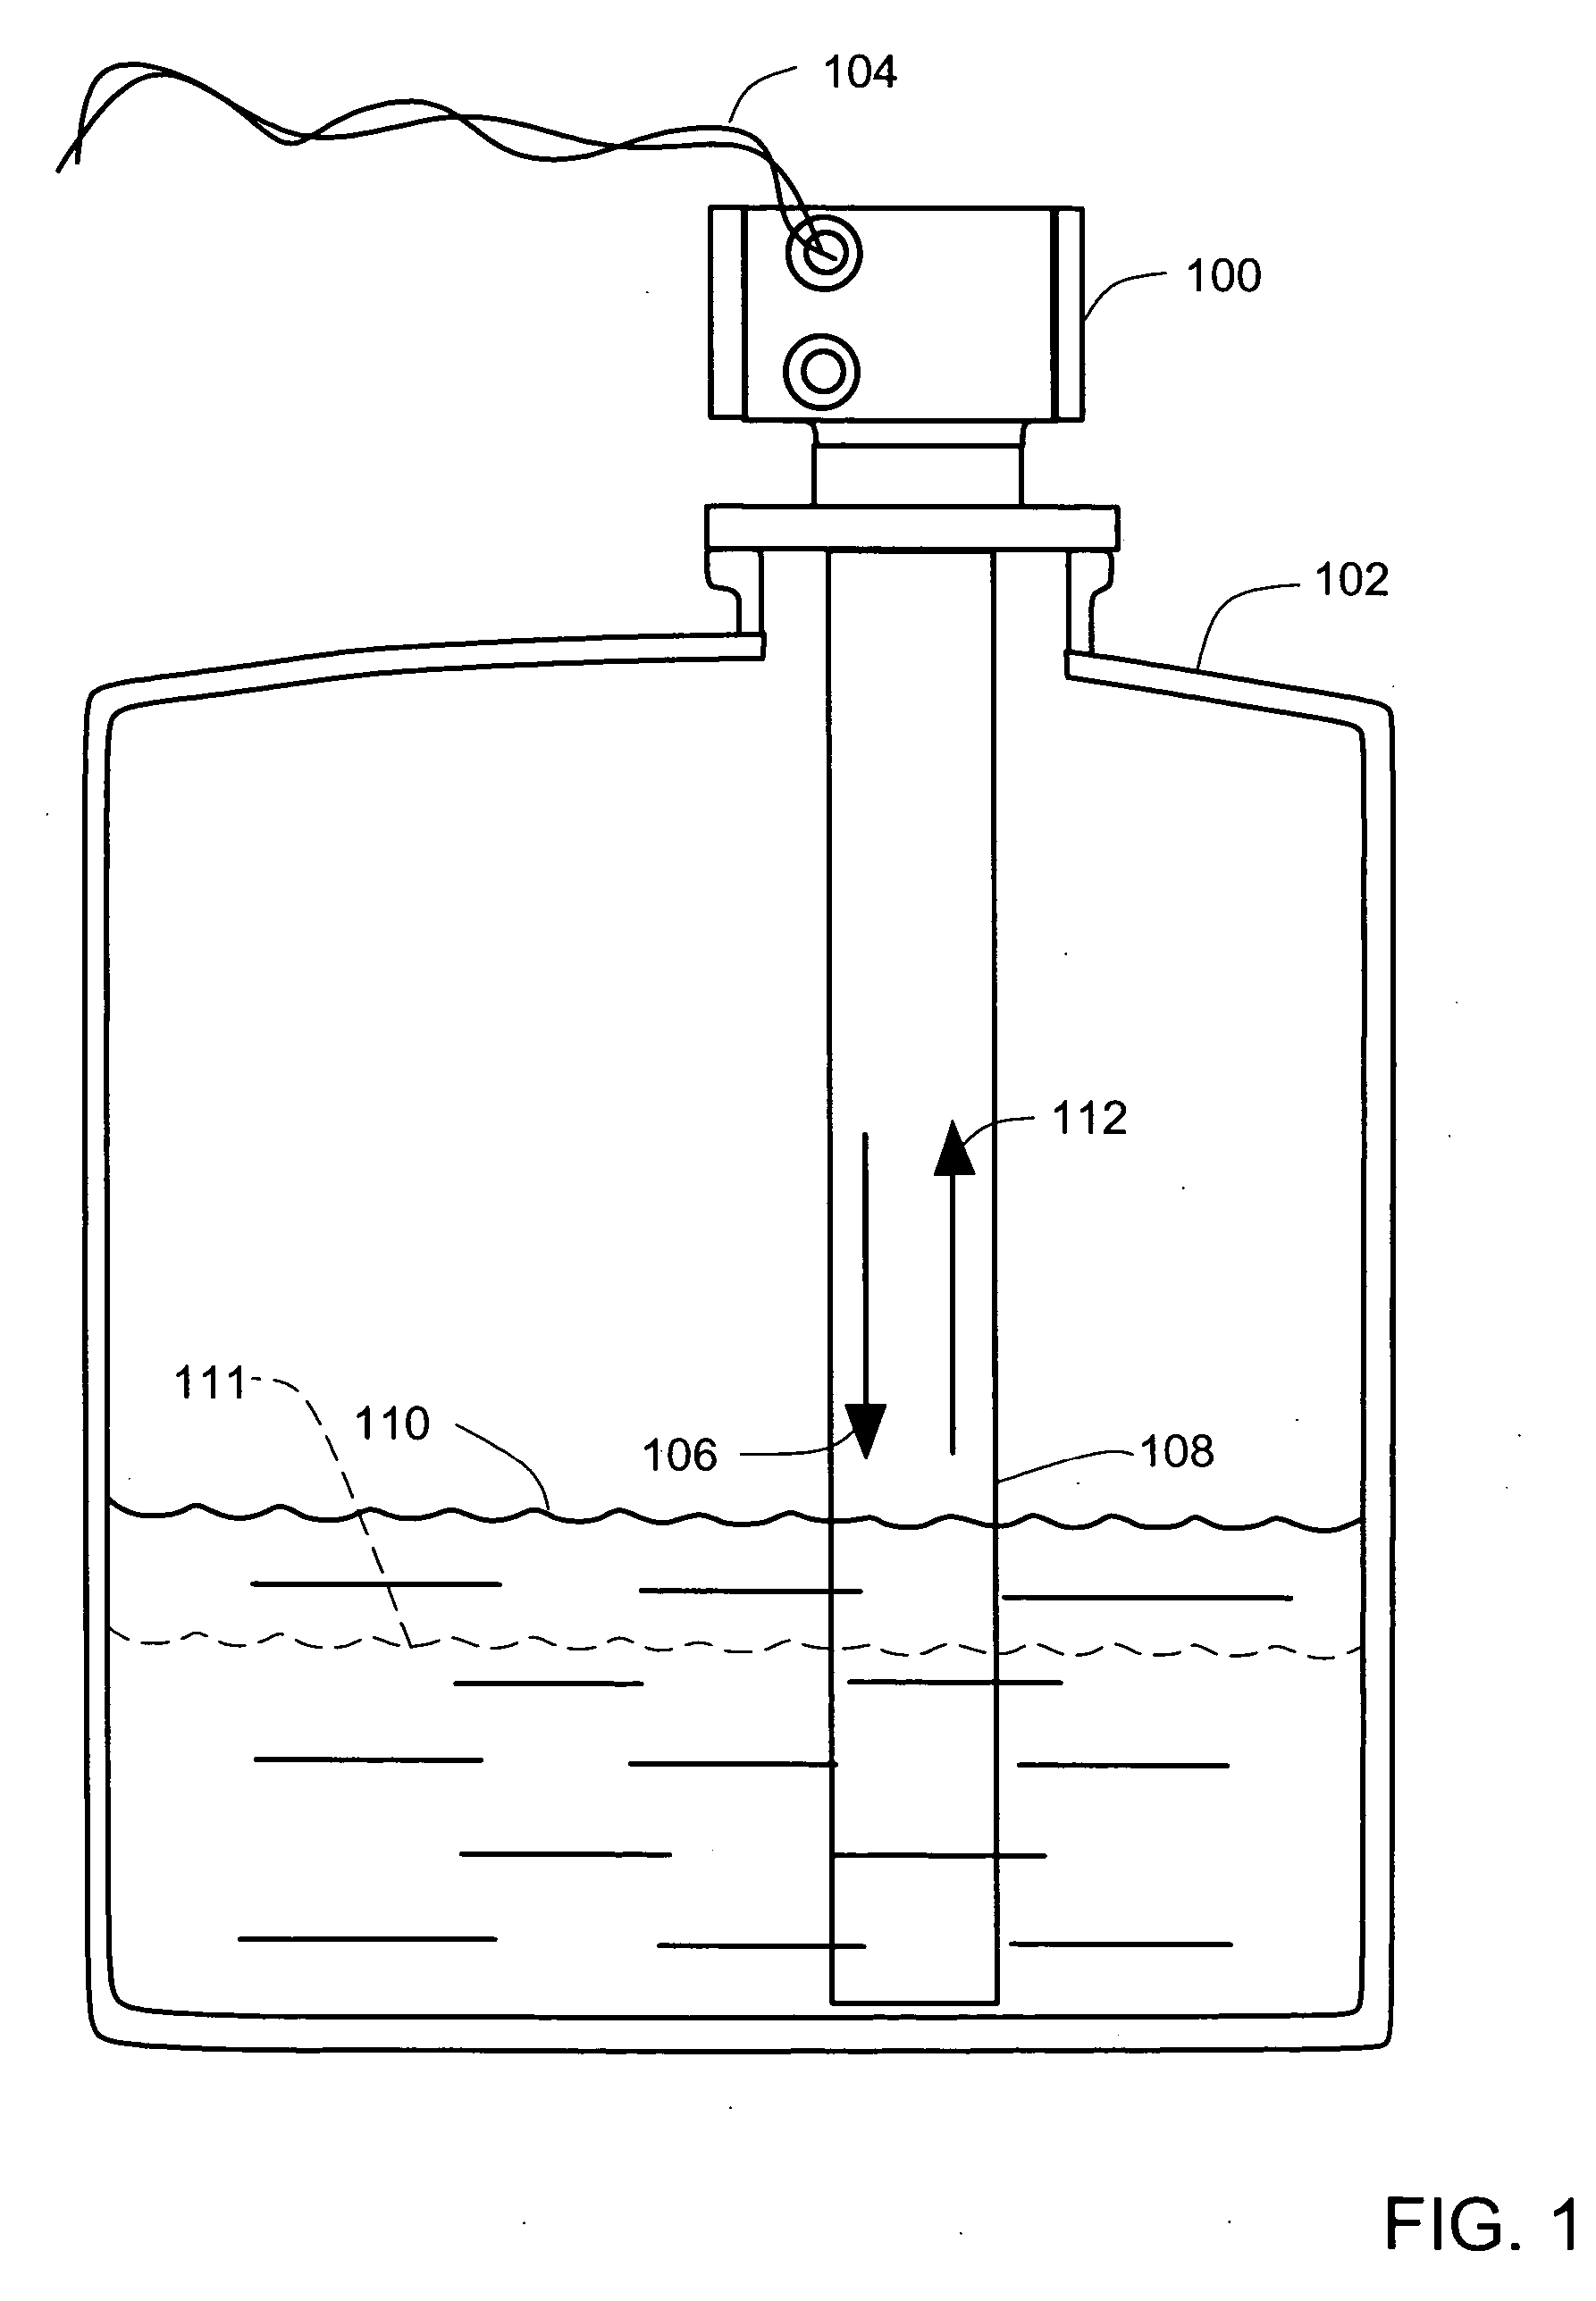 Test apparatus for a waveguide sensing level in a container